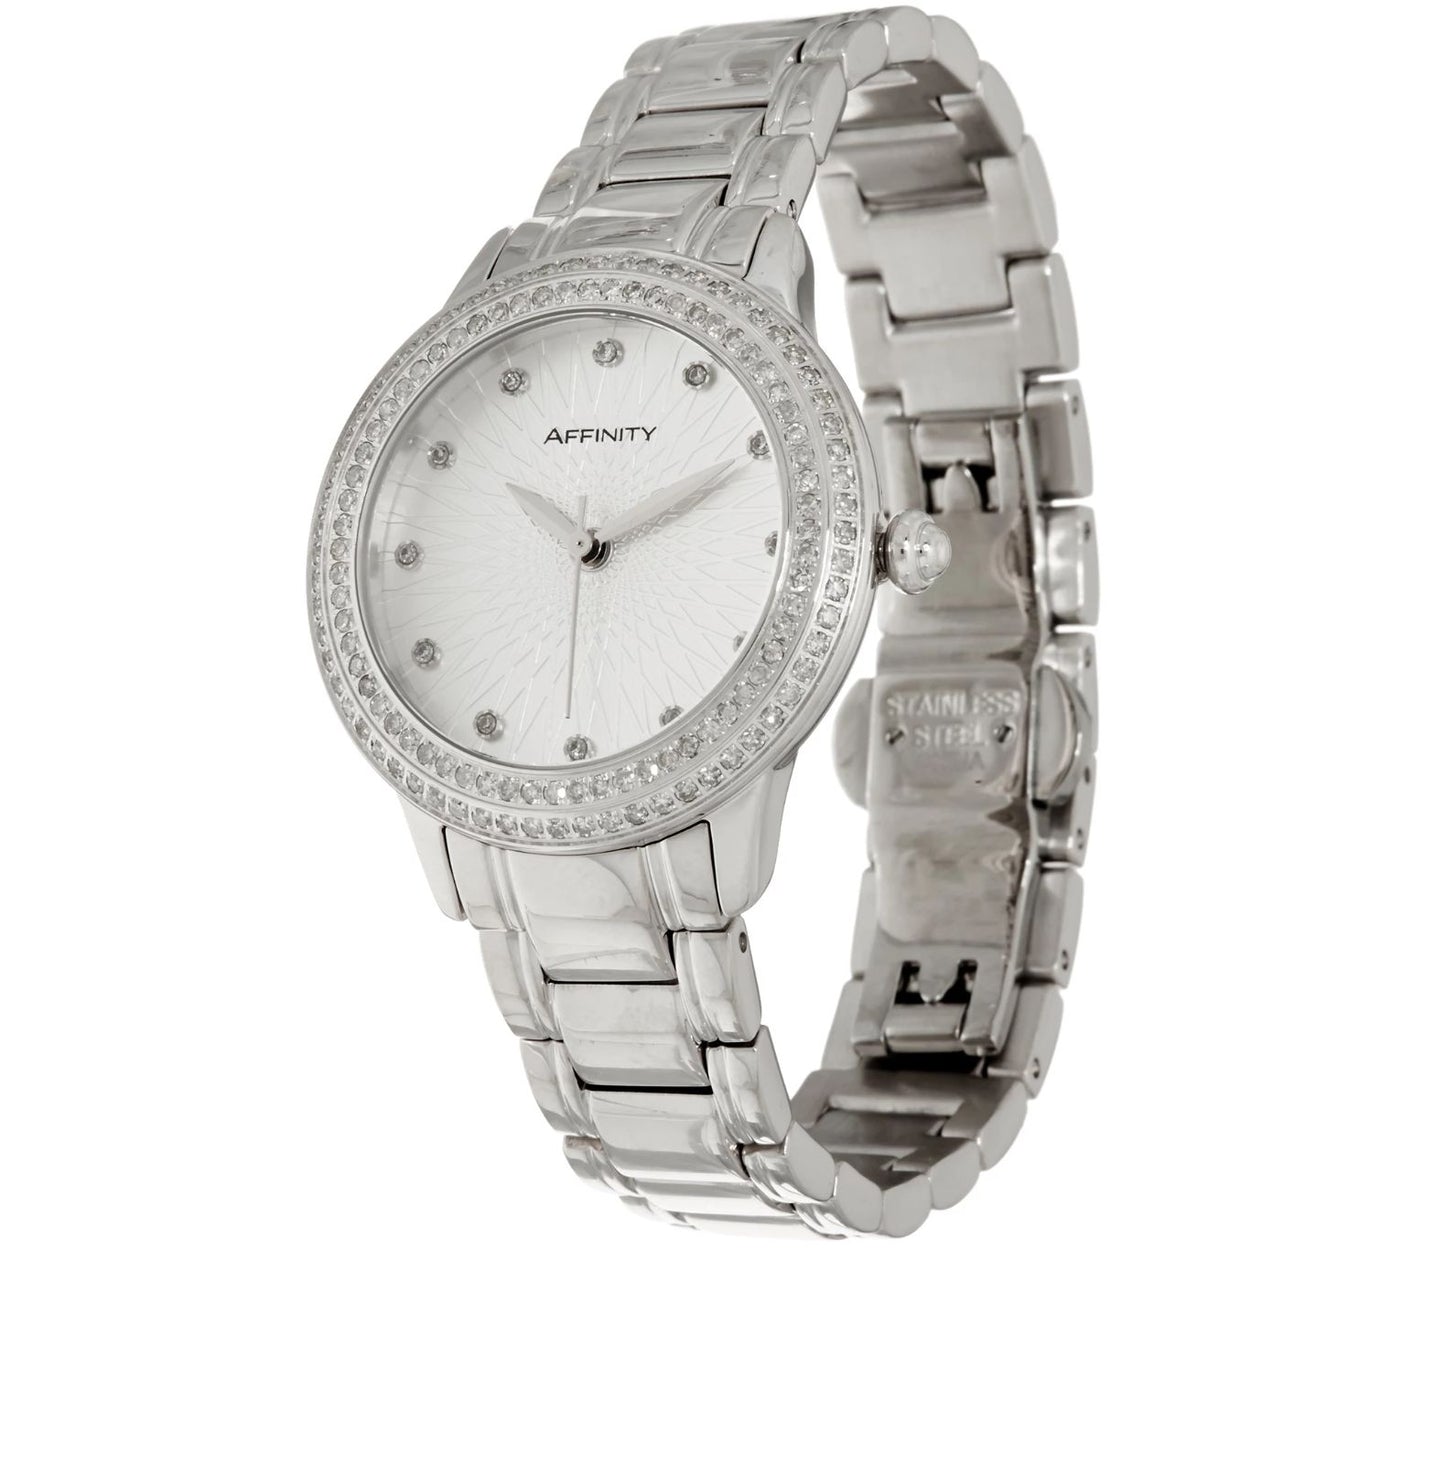 Pave' Round Diamond Watch, Stainless Steel by Affinity. 6-1/2" Silvertone